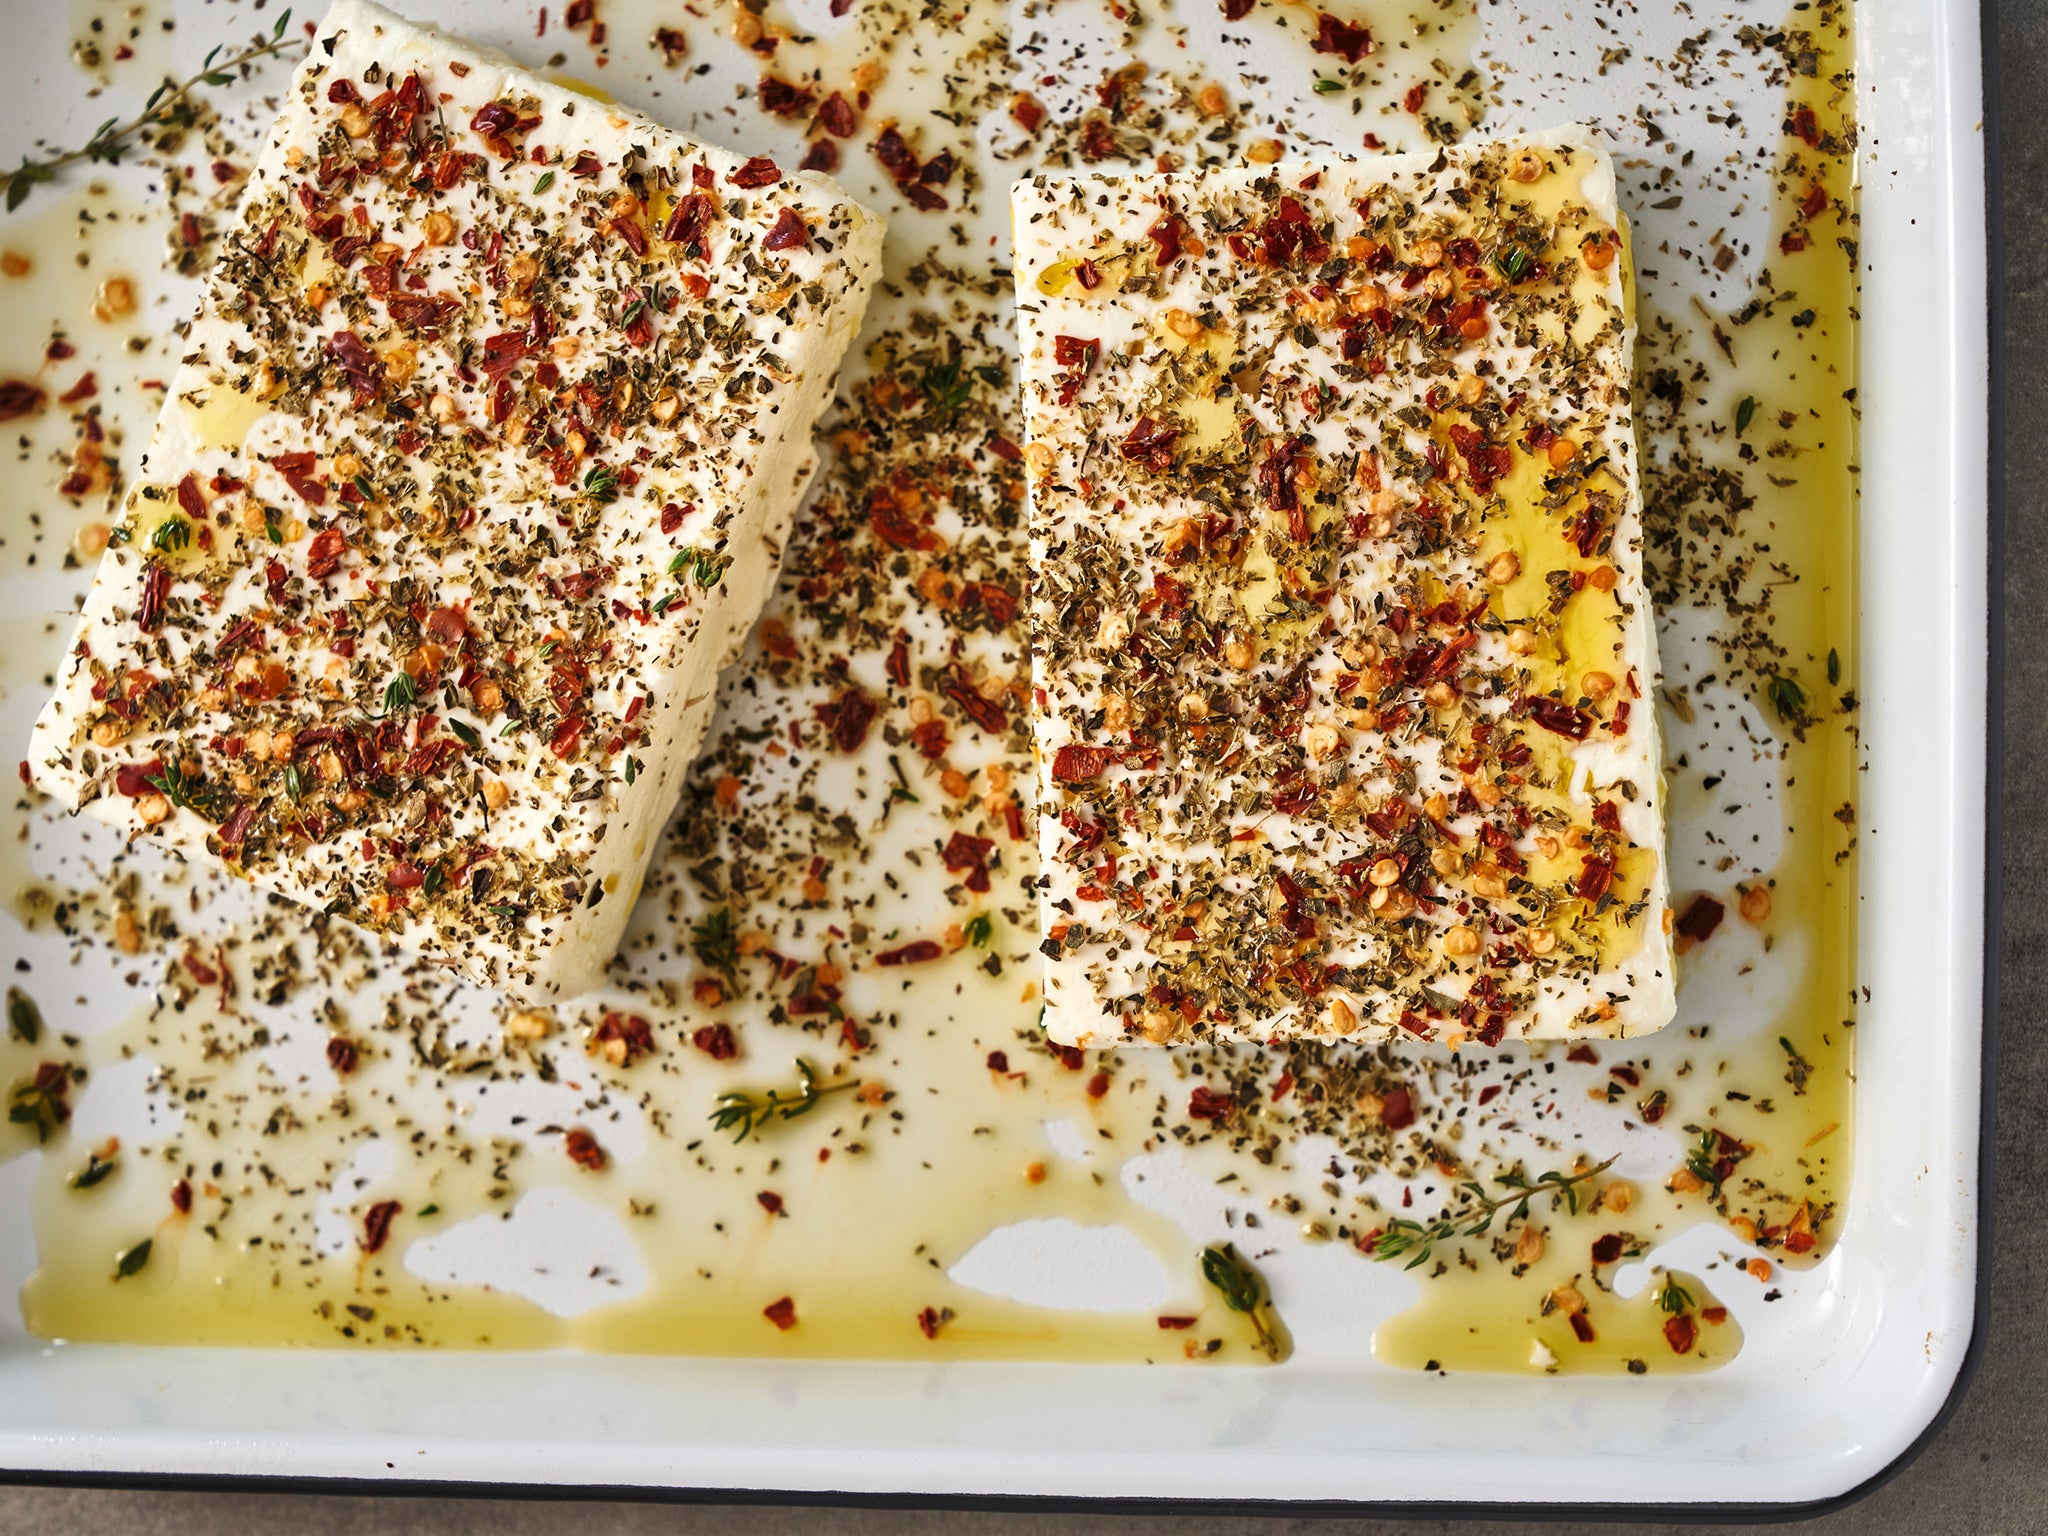 Make feta even better by popping it in the over to create a tasty, warm dip